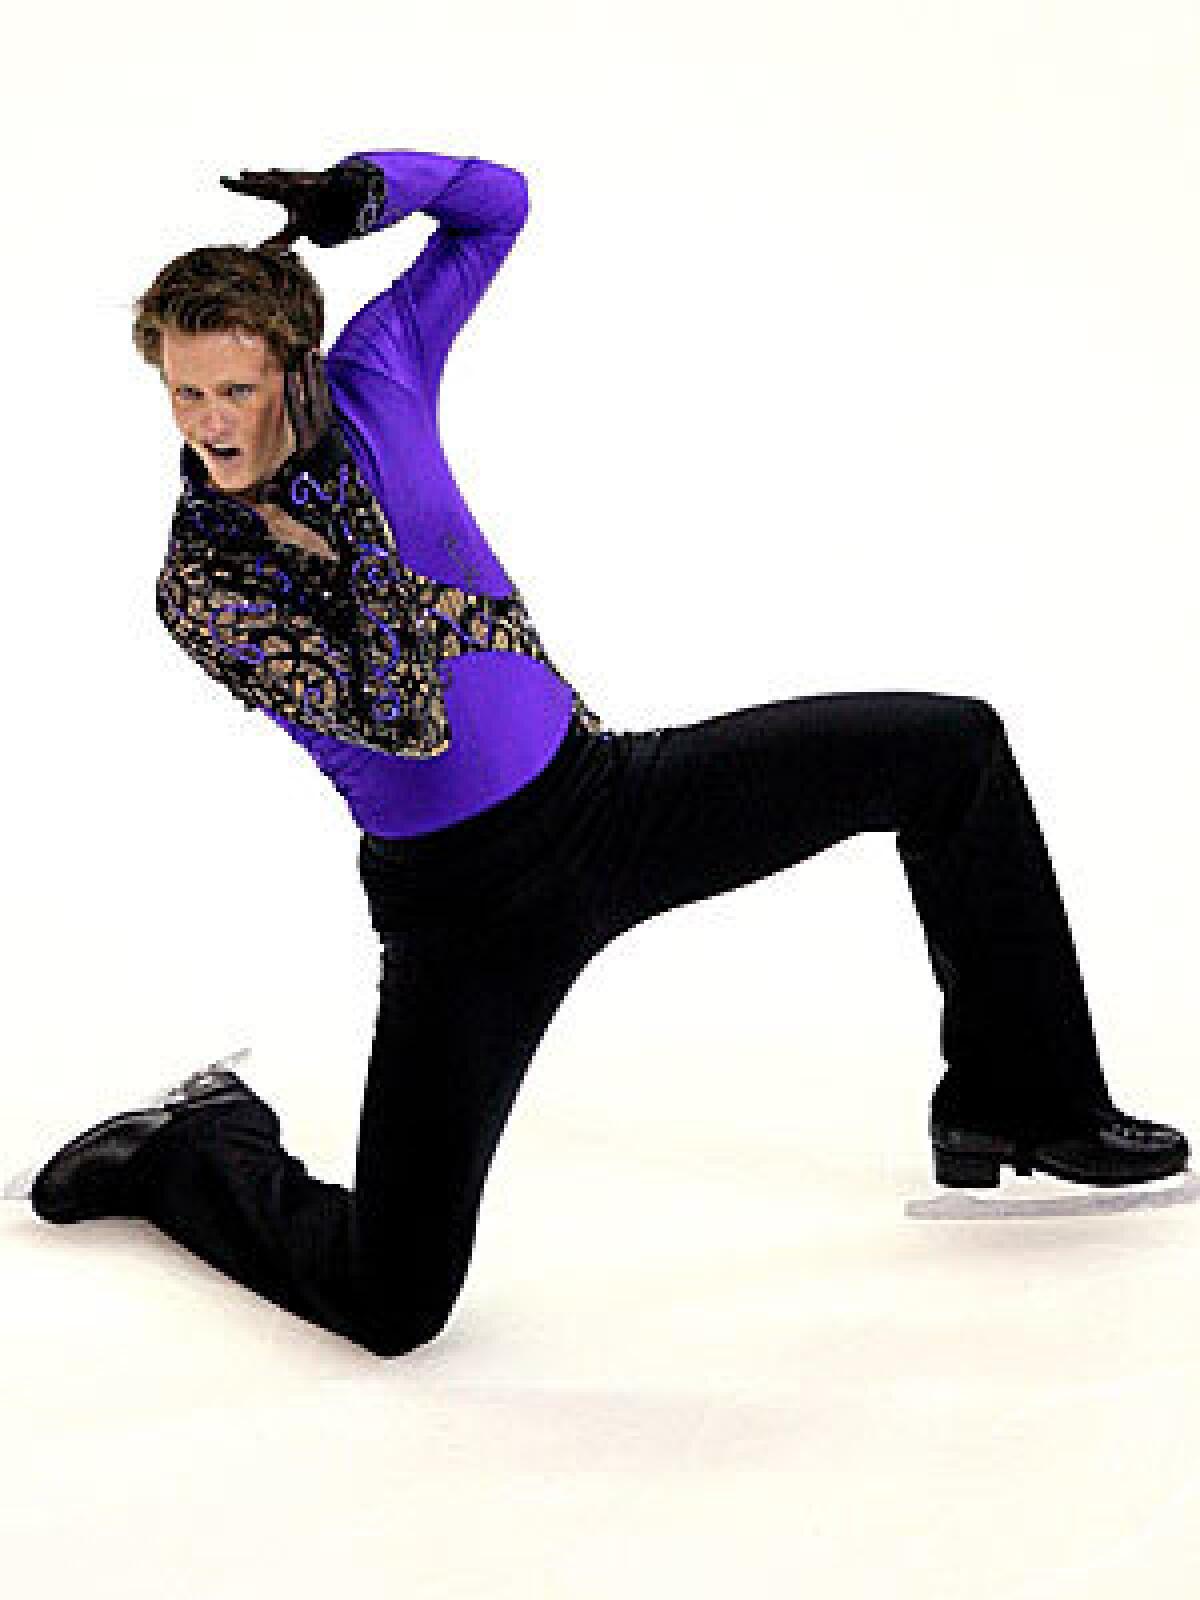 RHINESTONES AND ICE: Jeremy Abbott at the U.S. Figure Skating Championships in January.